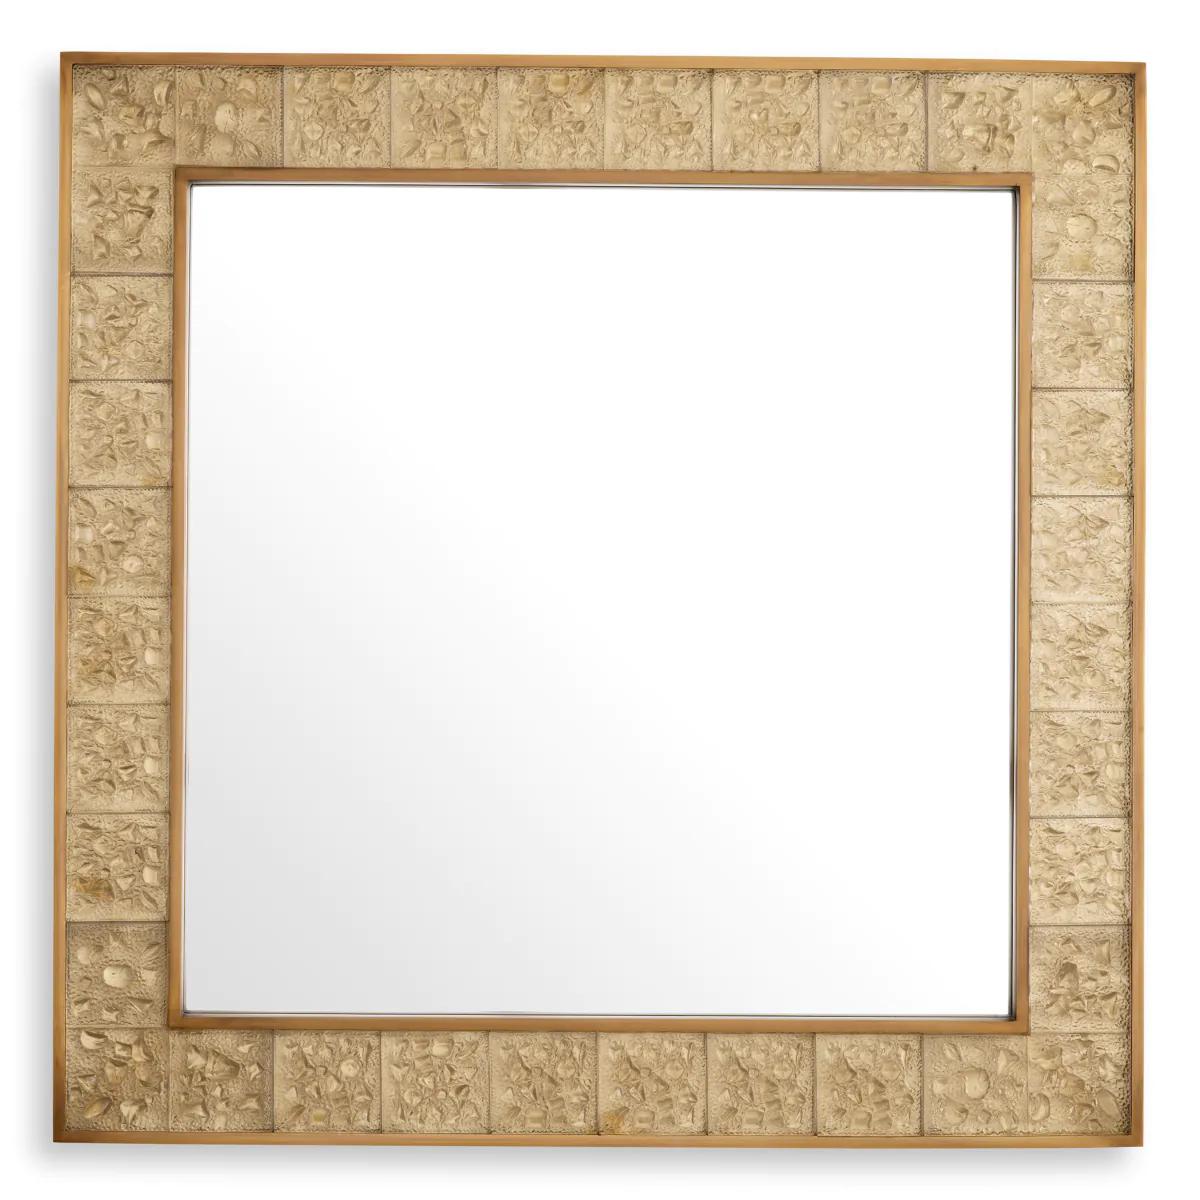 Mirror Sabrine with all frame in solid brass
in vintage finish, with square flat mirror in
glass. Hanging method: French cleat.